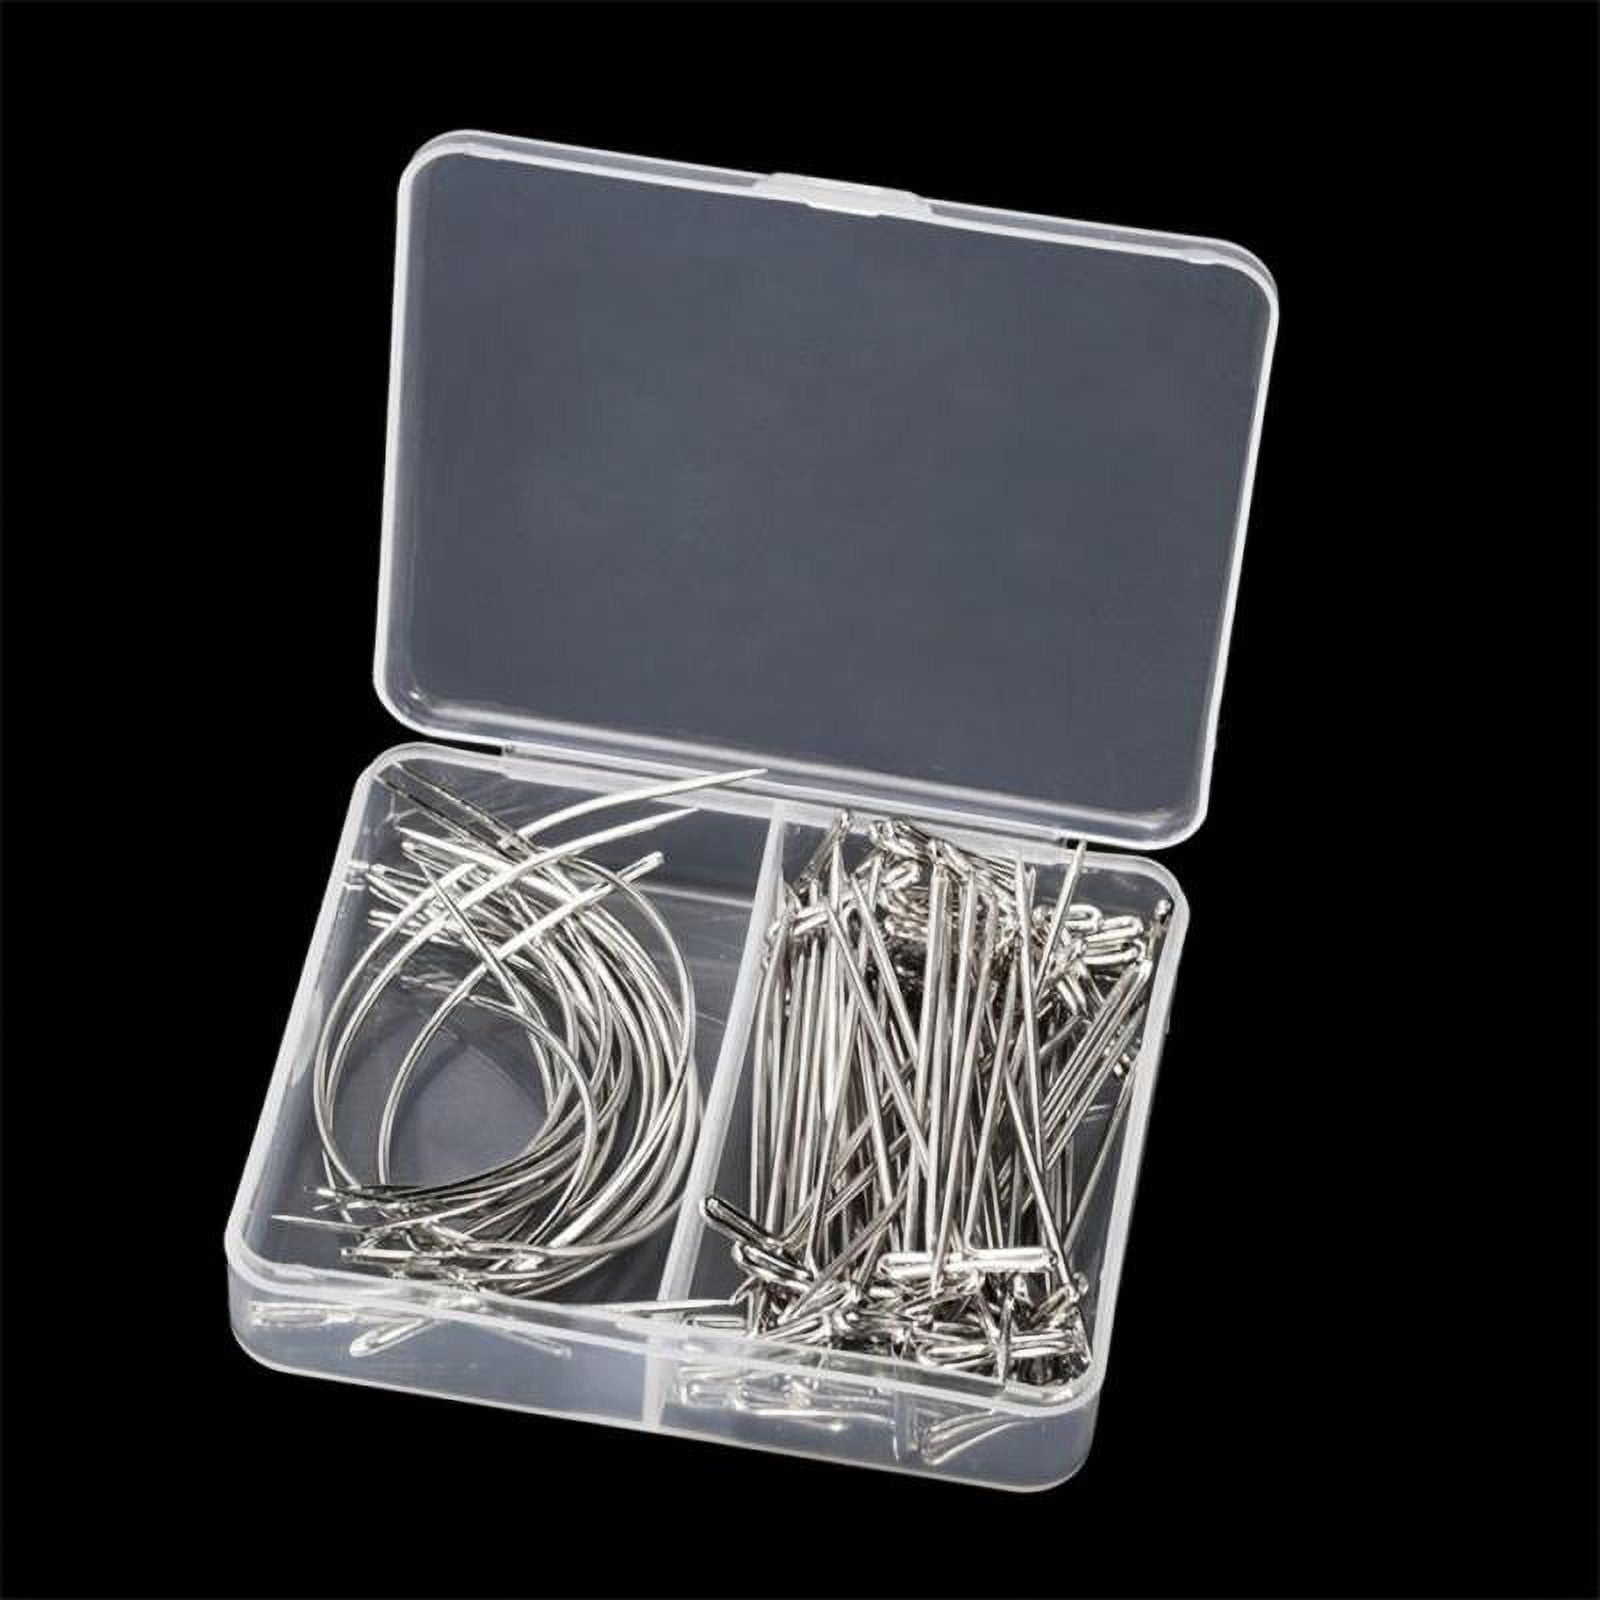  70 Pieces Wig Making Pins Needles Set, Wig T Pins and C Curved  Needles Hair Weave Needles for Wig Making, Blocking Knitting, Modelling and  Crafts : Arts, Crafts & Sewing